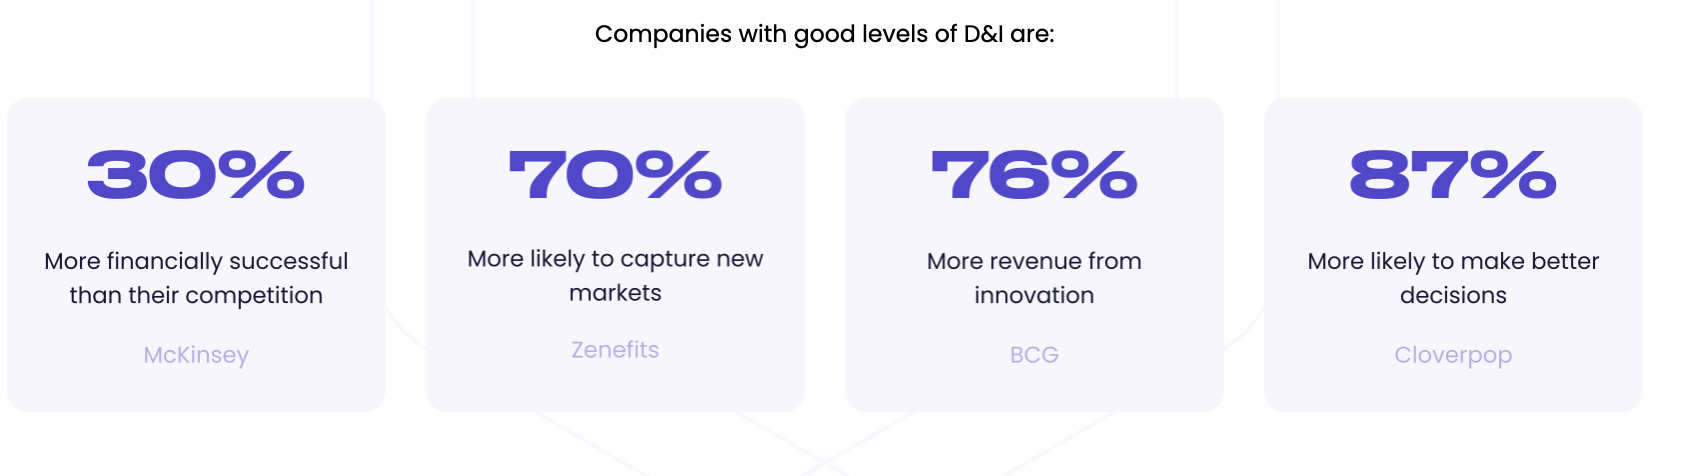 Companies with good DEI are: 30% more financially successful than the competition (McKinsey), 70% more likely to capture new markets (Zenefits), get 76% more revenue from innovation (BCG), 87% more likely to make better decisions (Cloverpop).